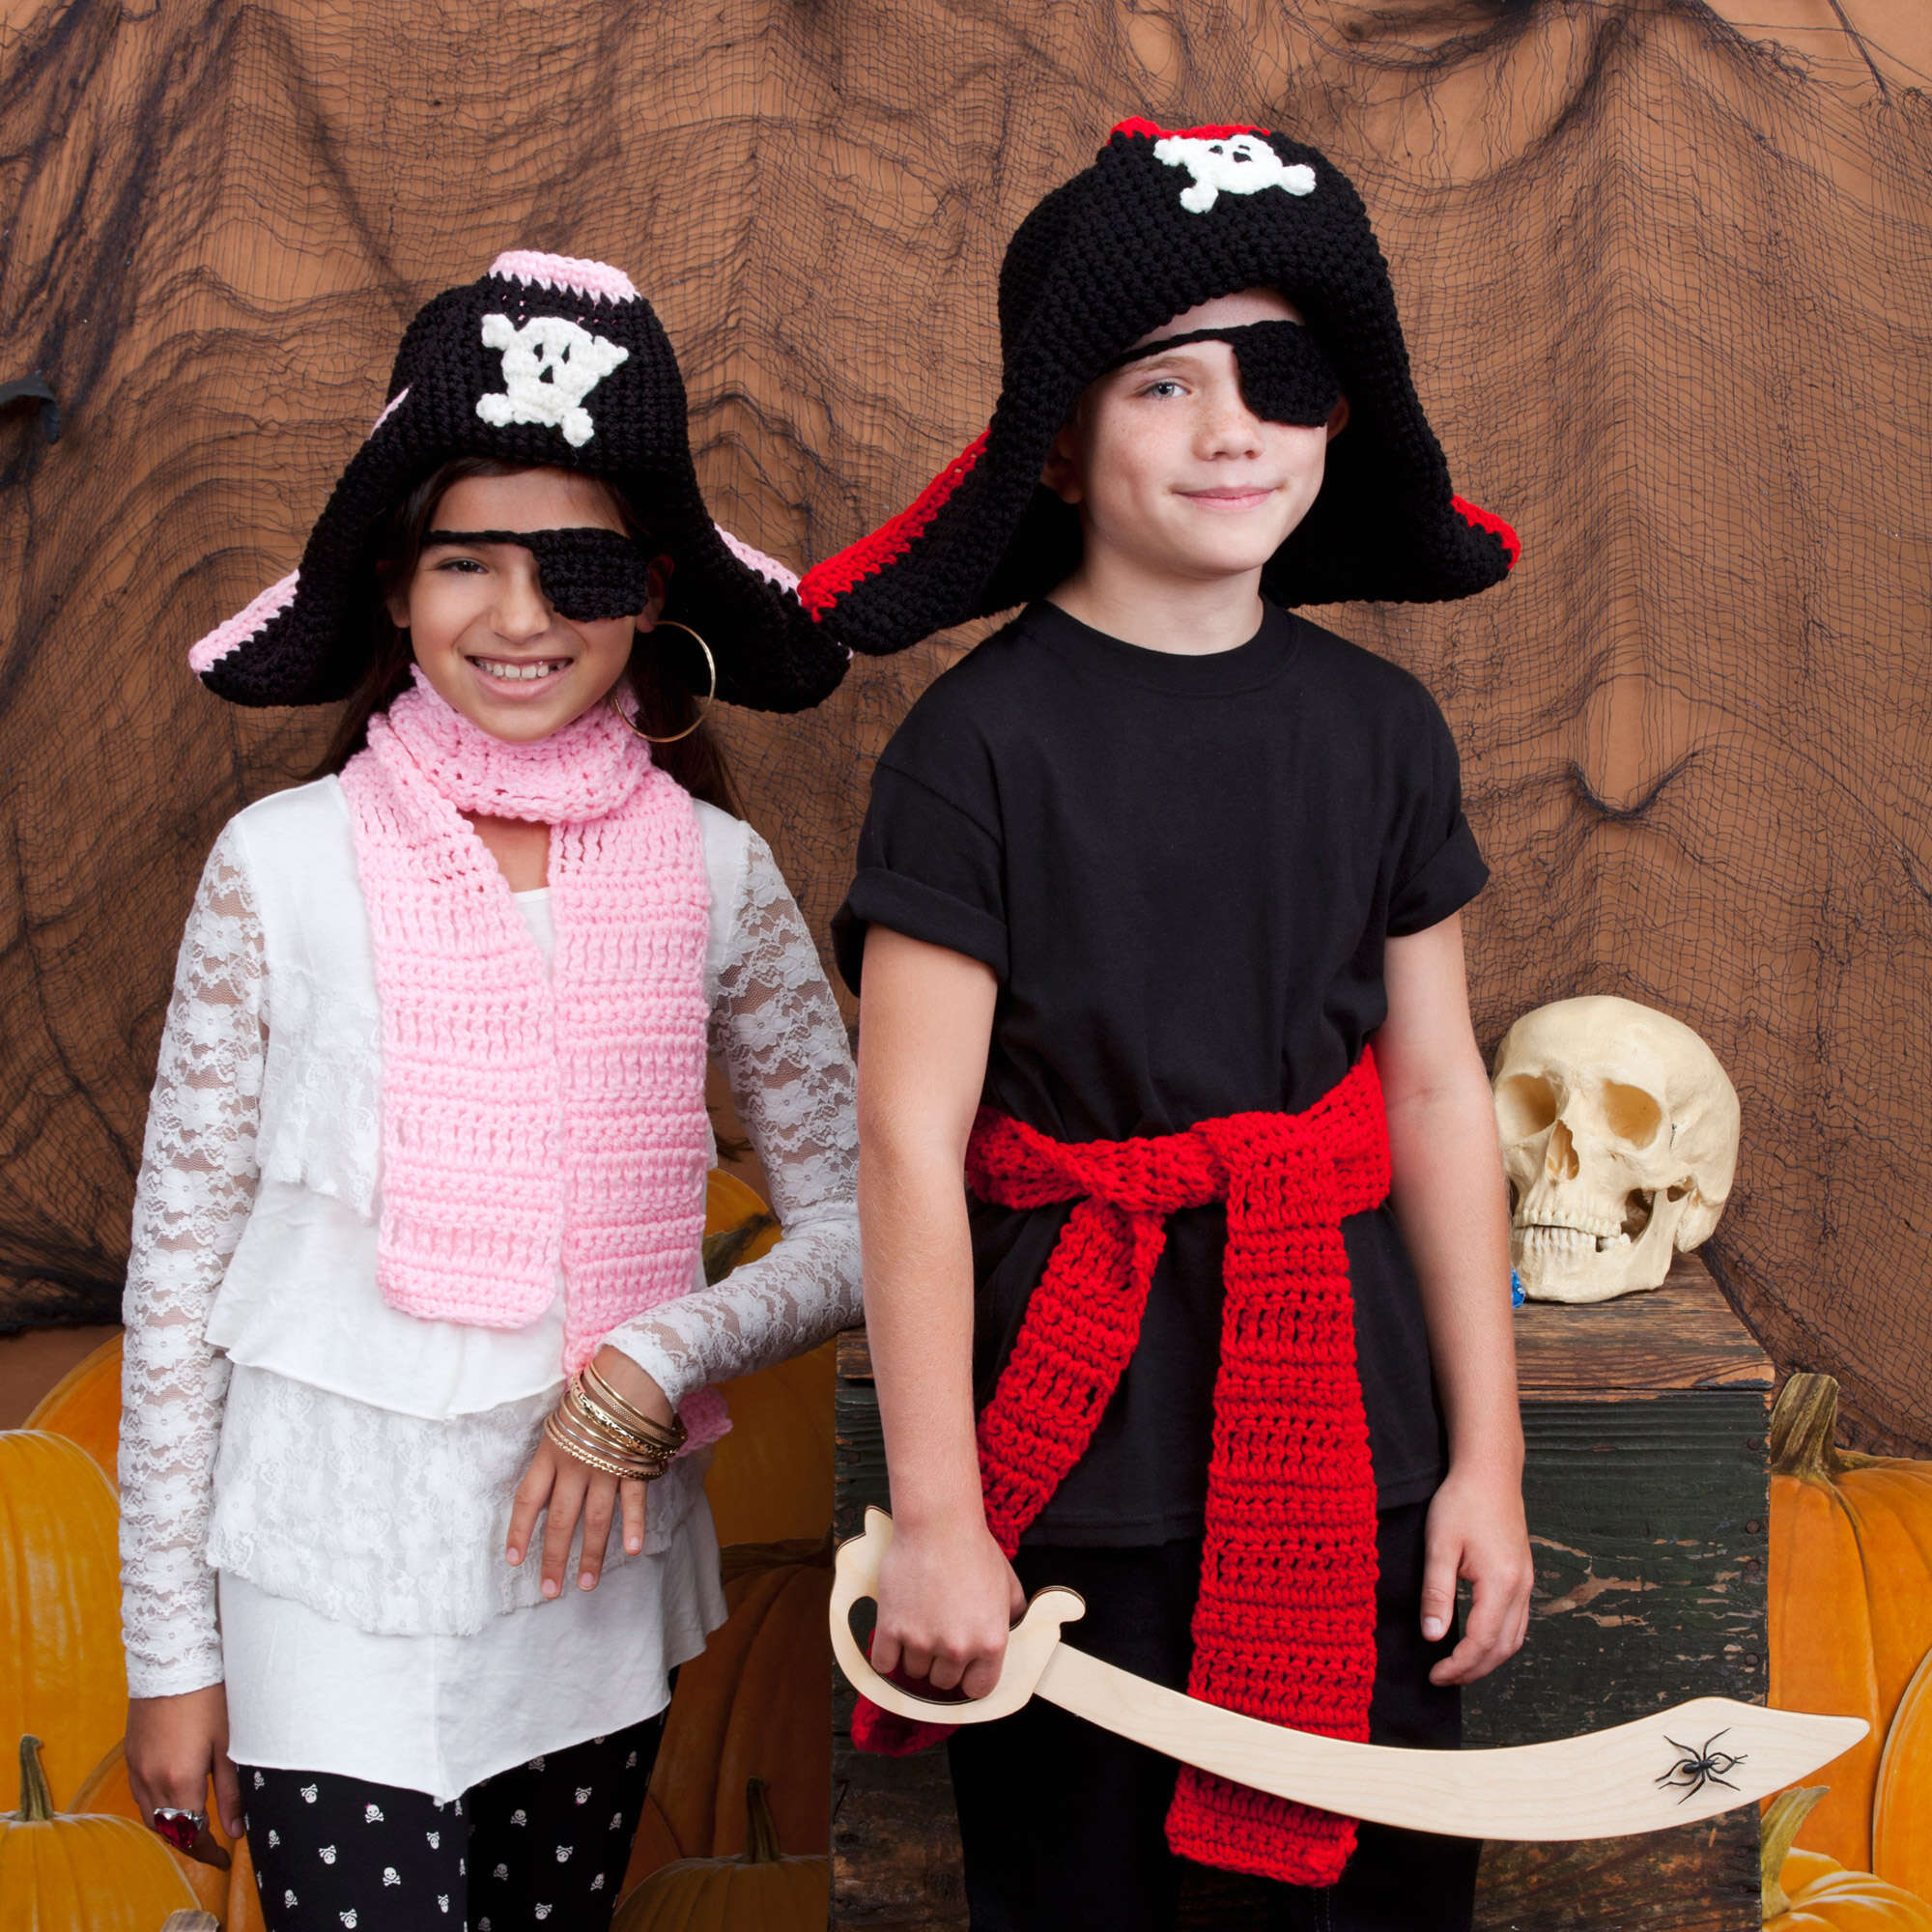 Pirate Costume Photography: Capturing Swashbuckling Tales Through the Lens插图